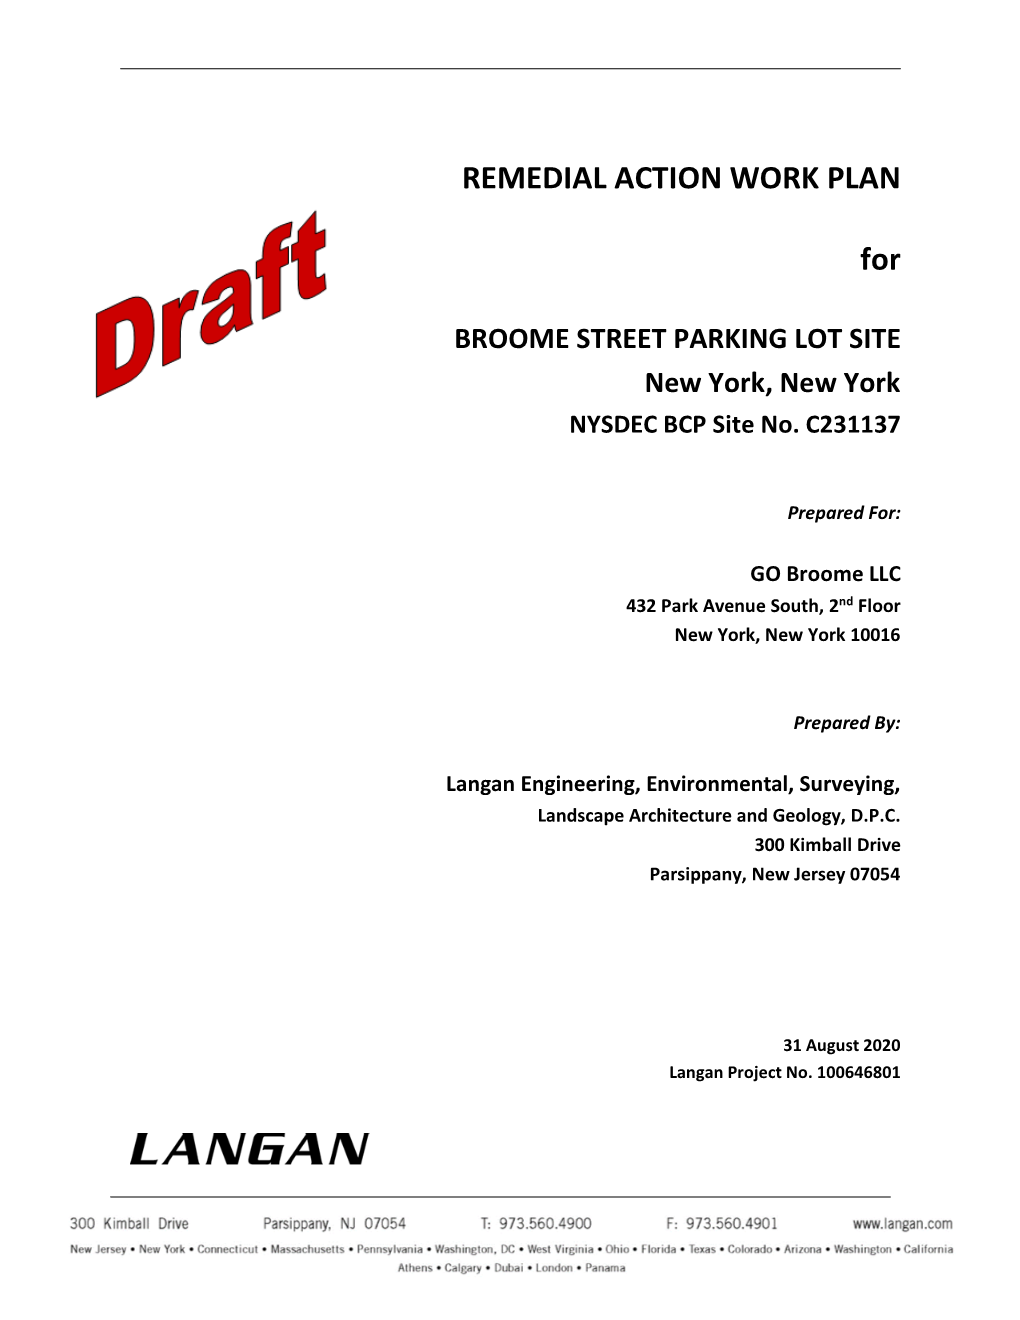 Generic Template for Final Remedial Action Work Plan